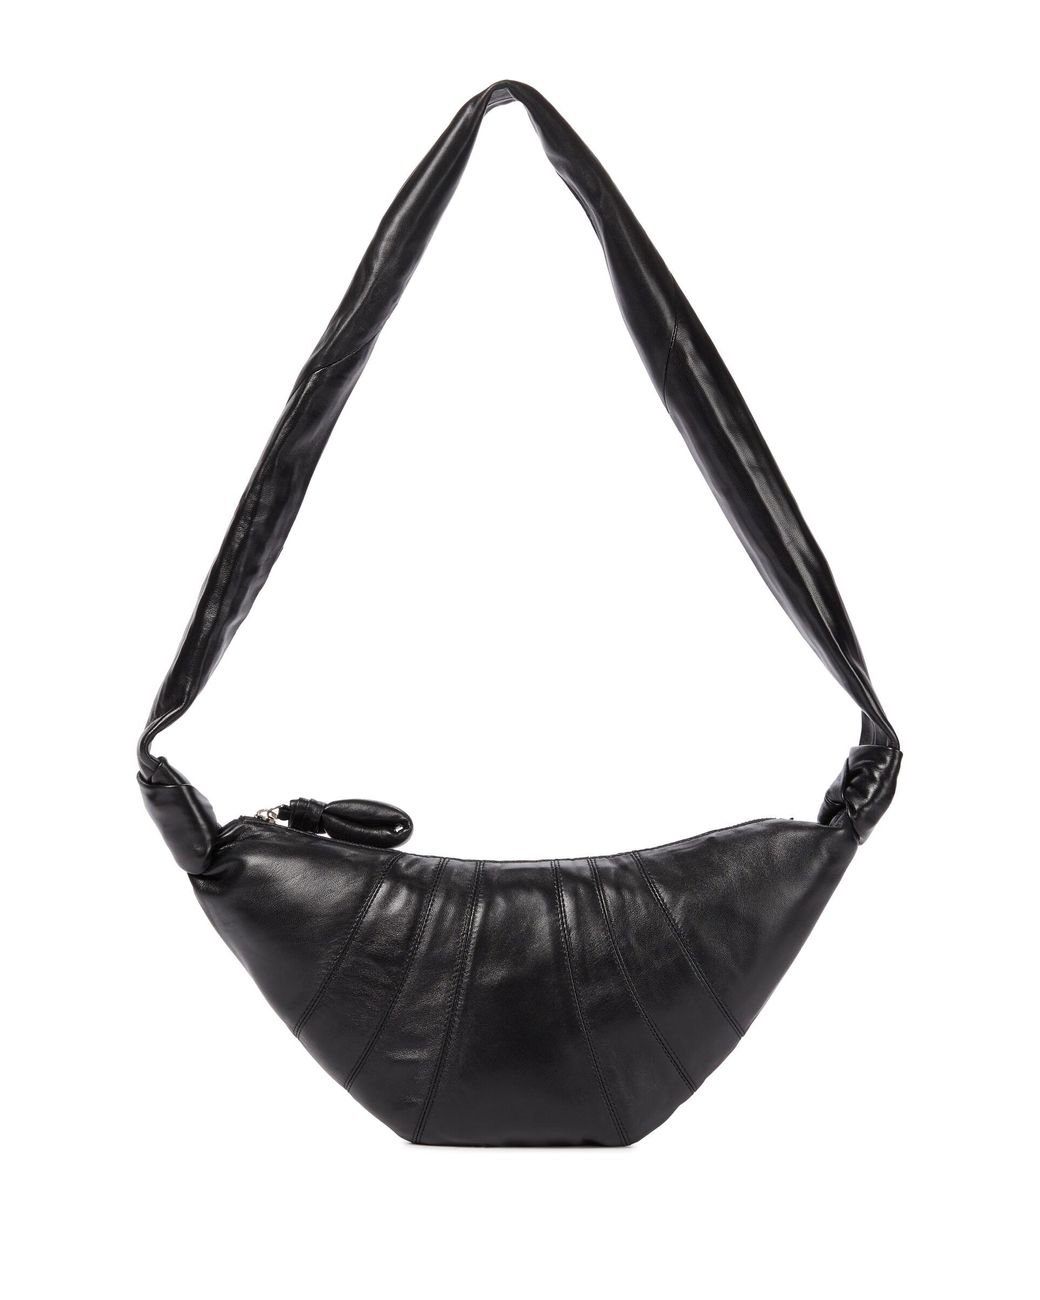 Lemaire Croissant Small Leather Shoulder Bag in Black | Lyst